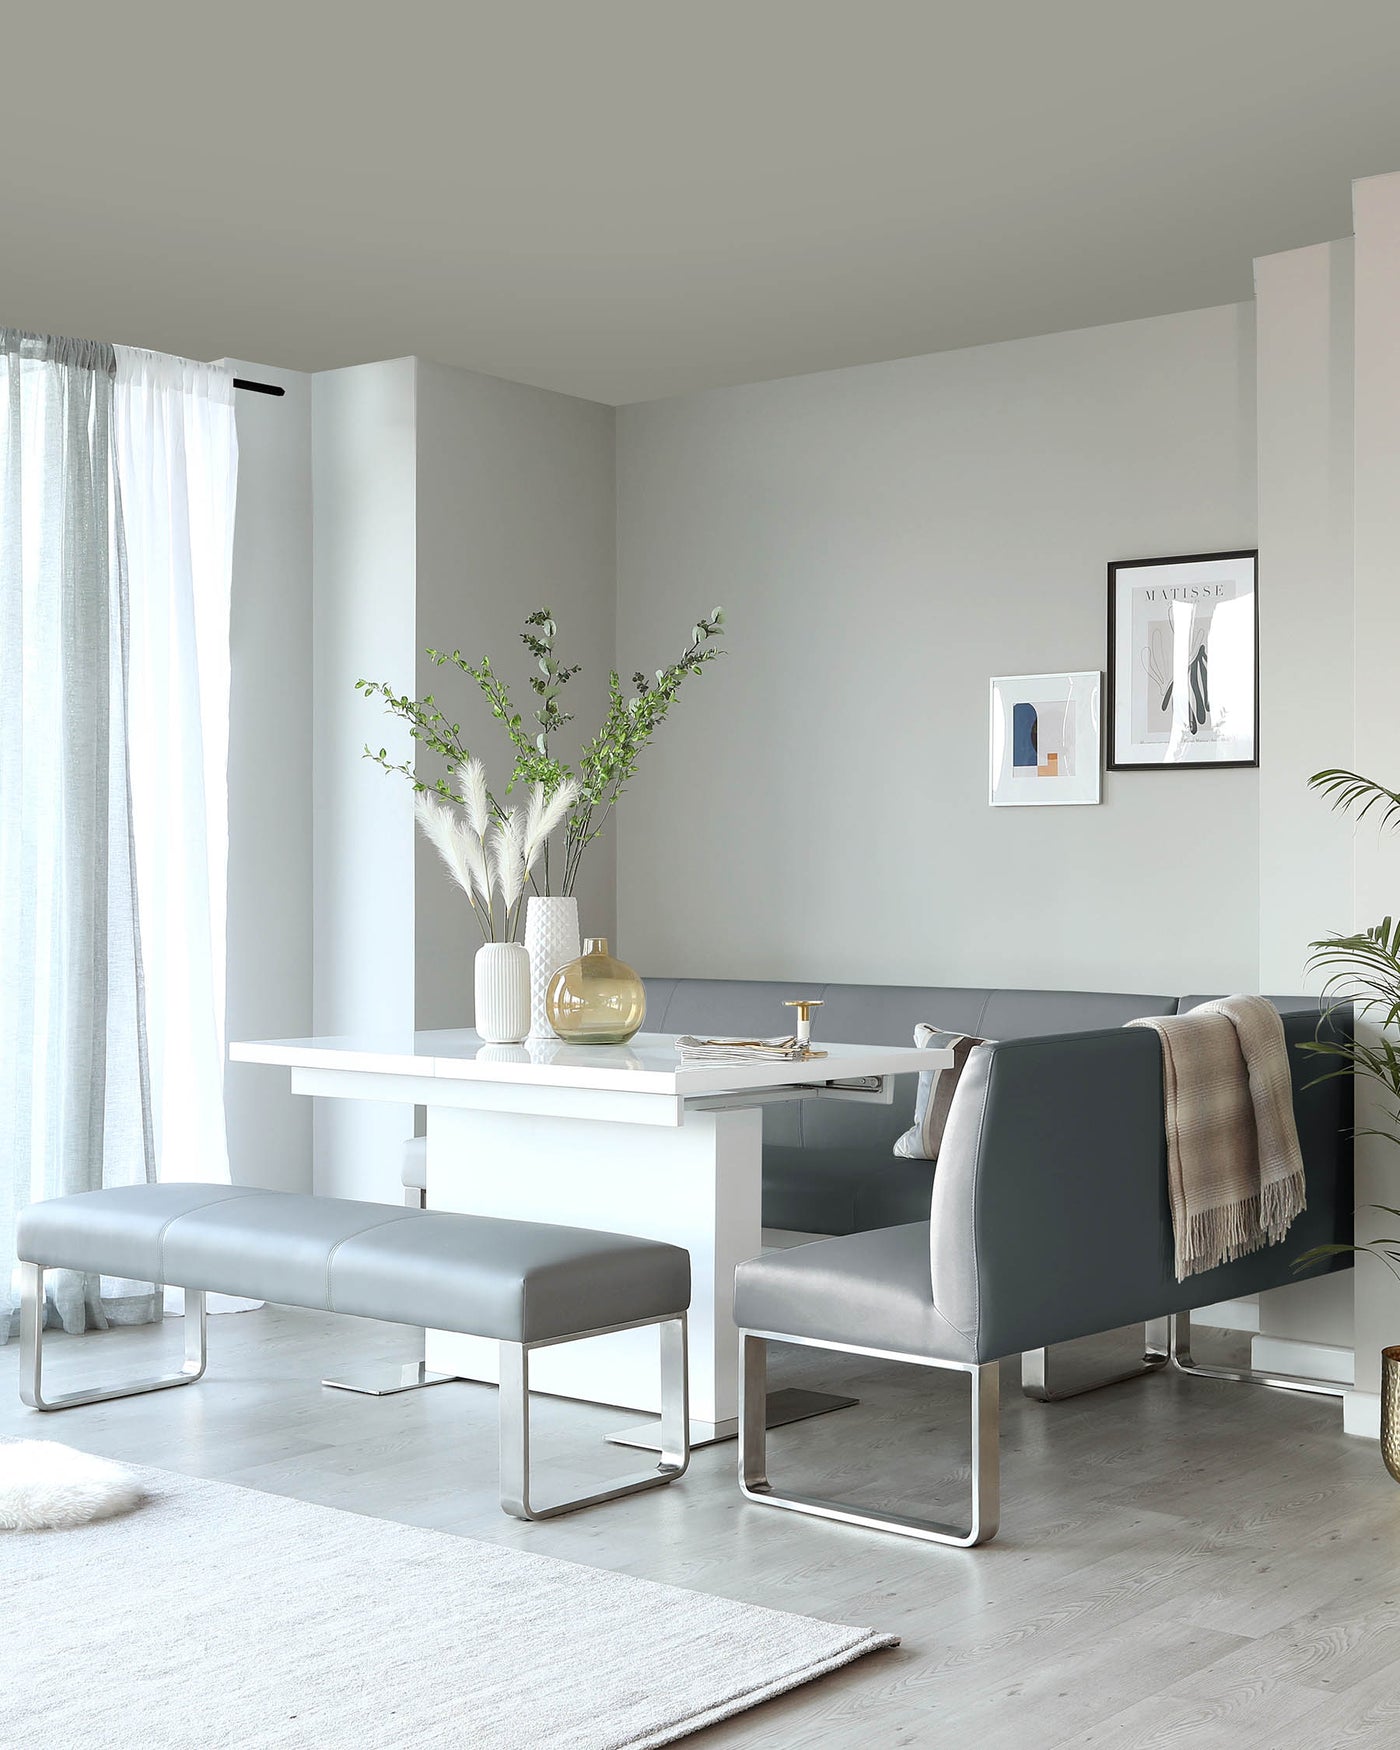 Modern minimalist furniture set featuring a sleek white rectangular dining table with a smooth finish, accompanied by a pair of grey upholstered benches with cushioned seats and chrome U-shaped legs, lending a contemporary and inviting aesthetic to the living space.